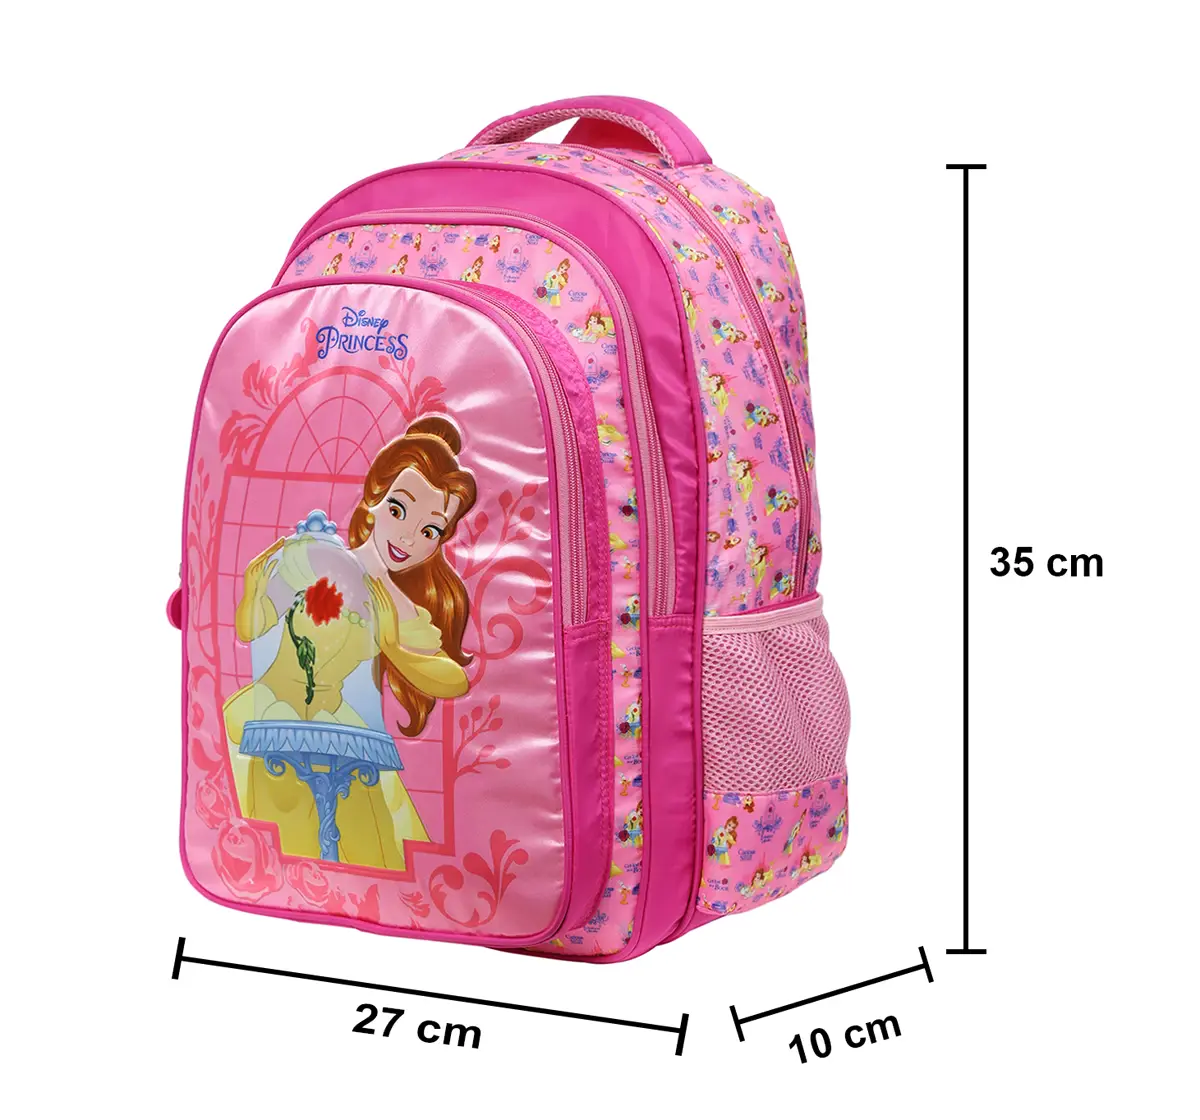 Simba Princess Amazing Belle 14 Backpack Multicolor 3Y+